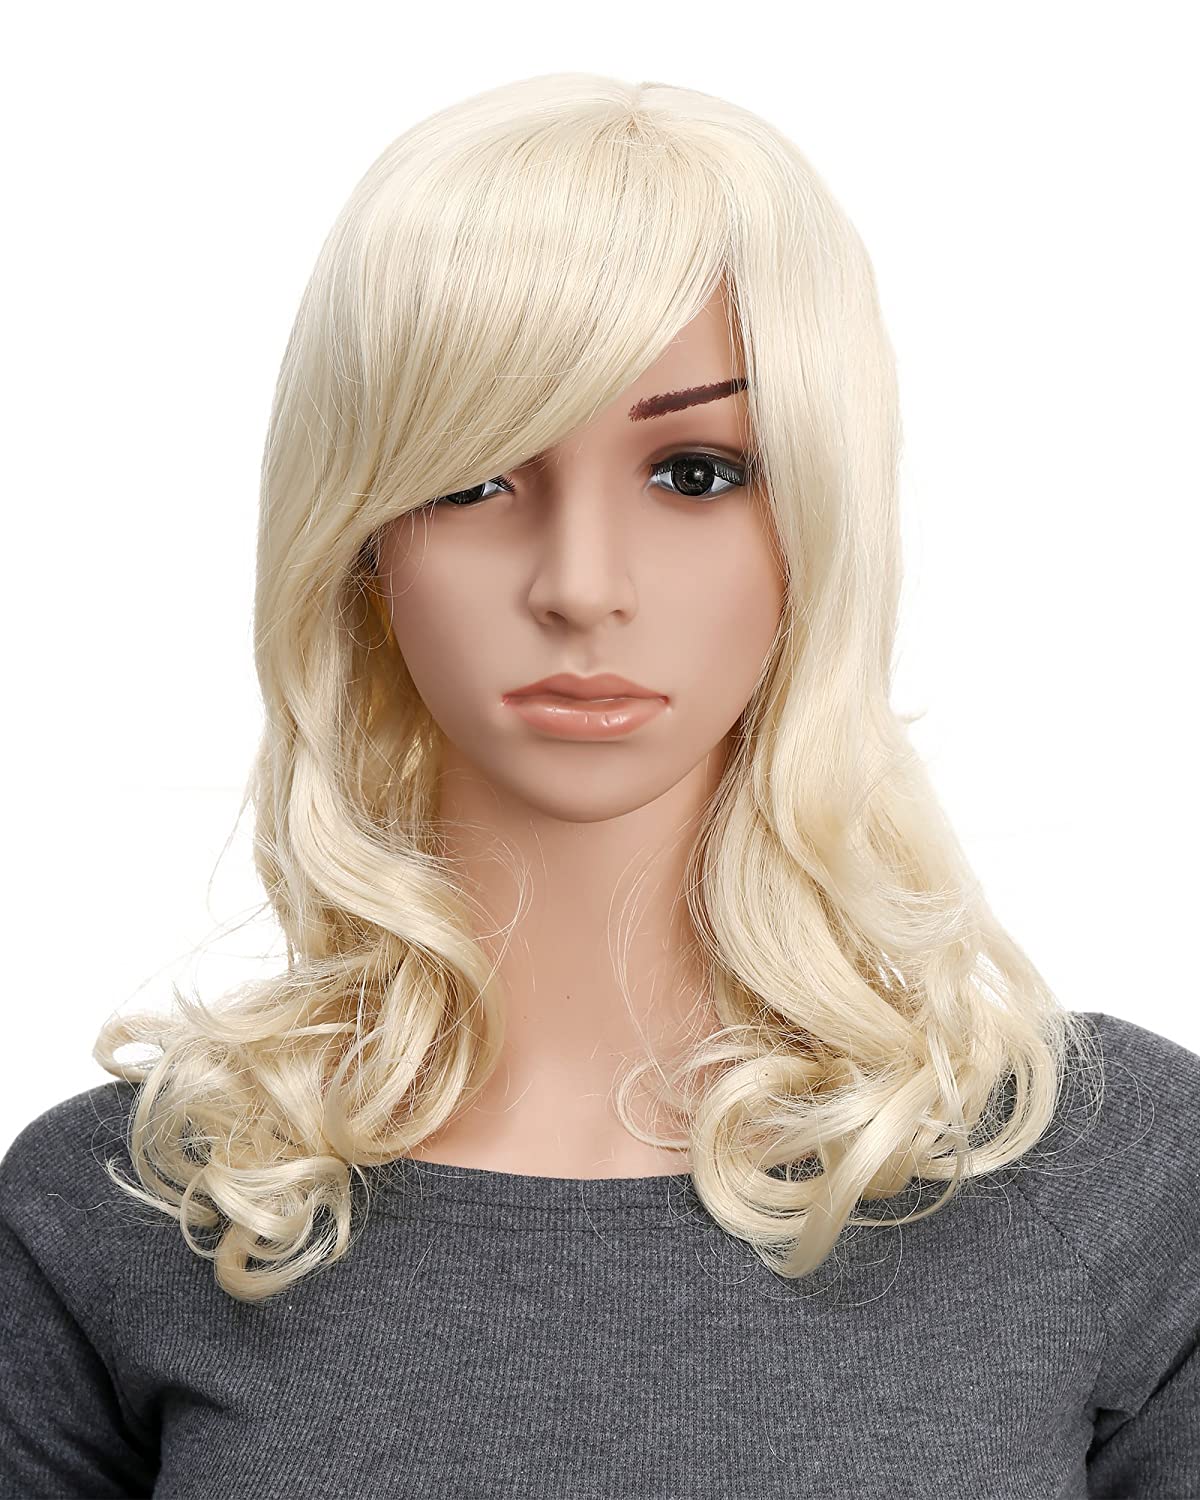 Onedor Full Head Beautiful Long Curly Wave Stunning Wig Charming Curly Costume Wigs with Fringe (pale blonde) - image 1 of 6